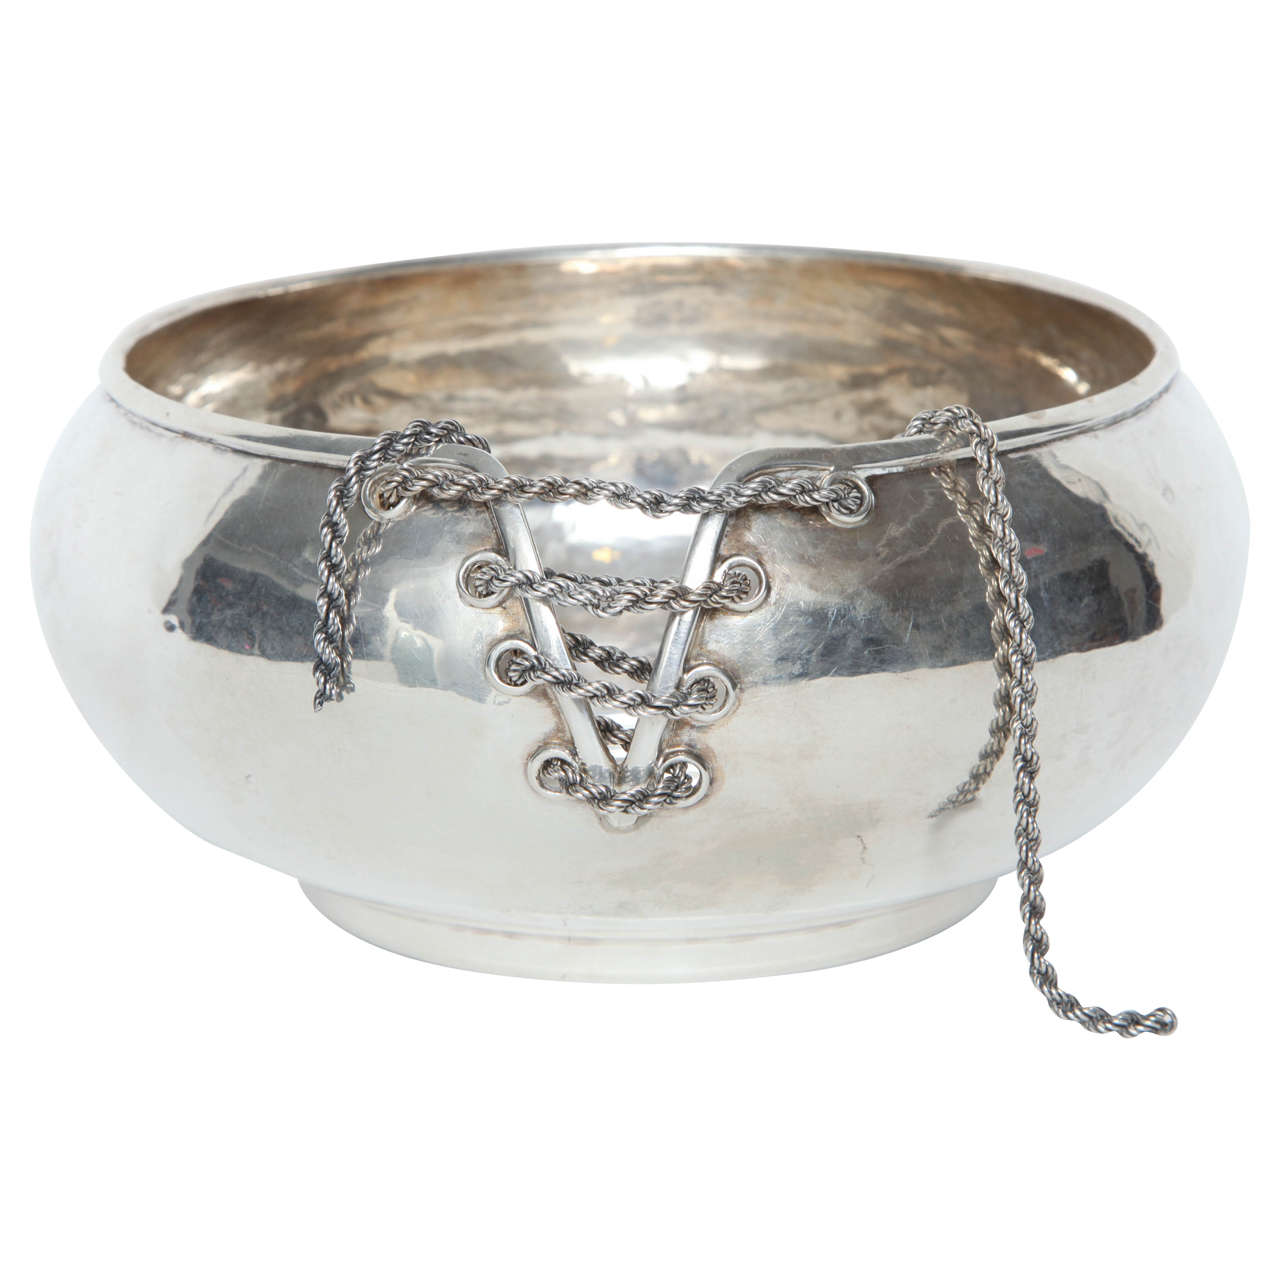 Italian Hand-Forged Silver "Corset" Bowl For Sale